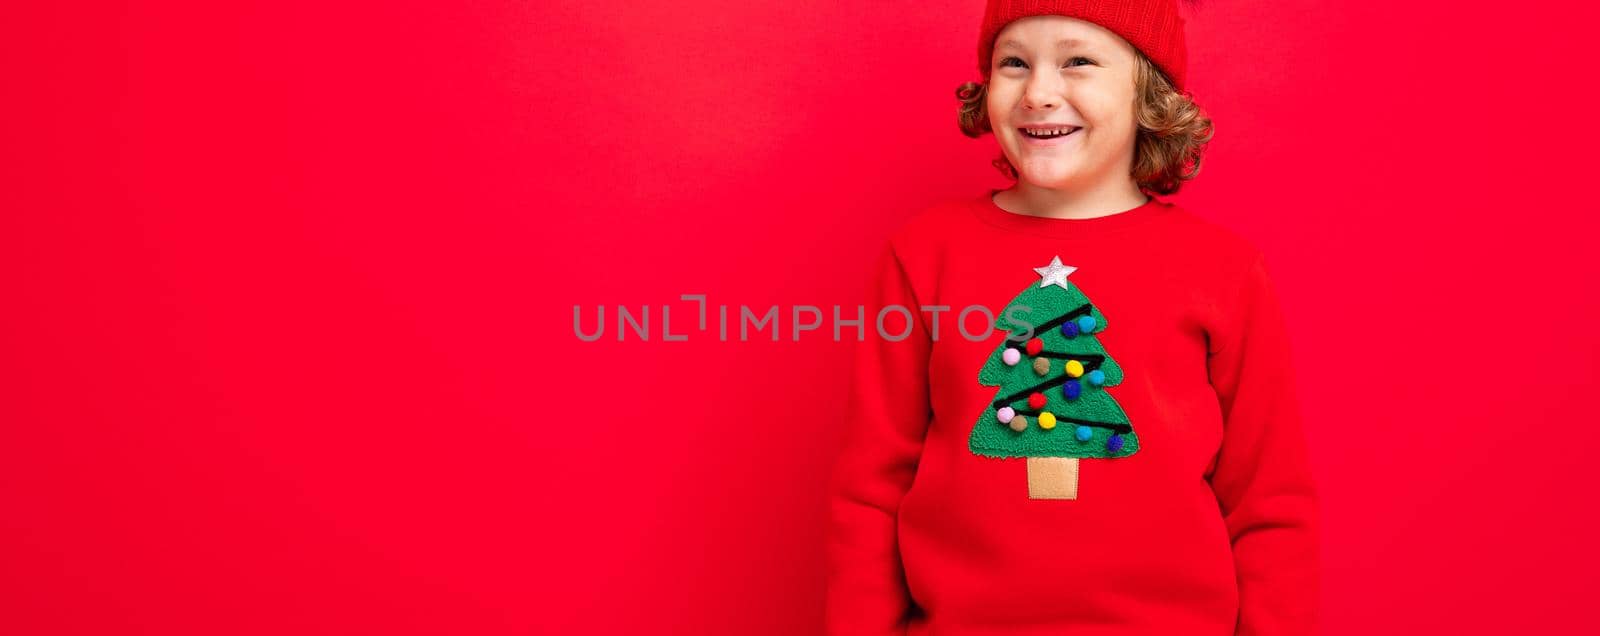 cute blond boy in warm hat and christmas sweater on red background with smile on his face by TRMK